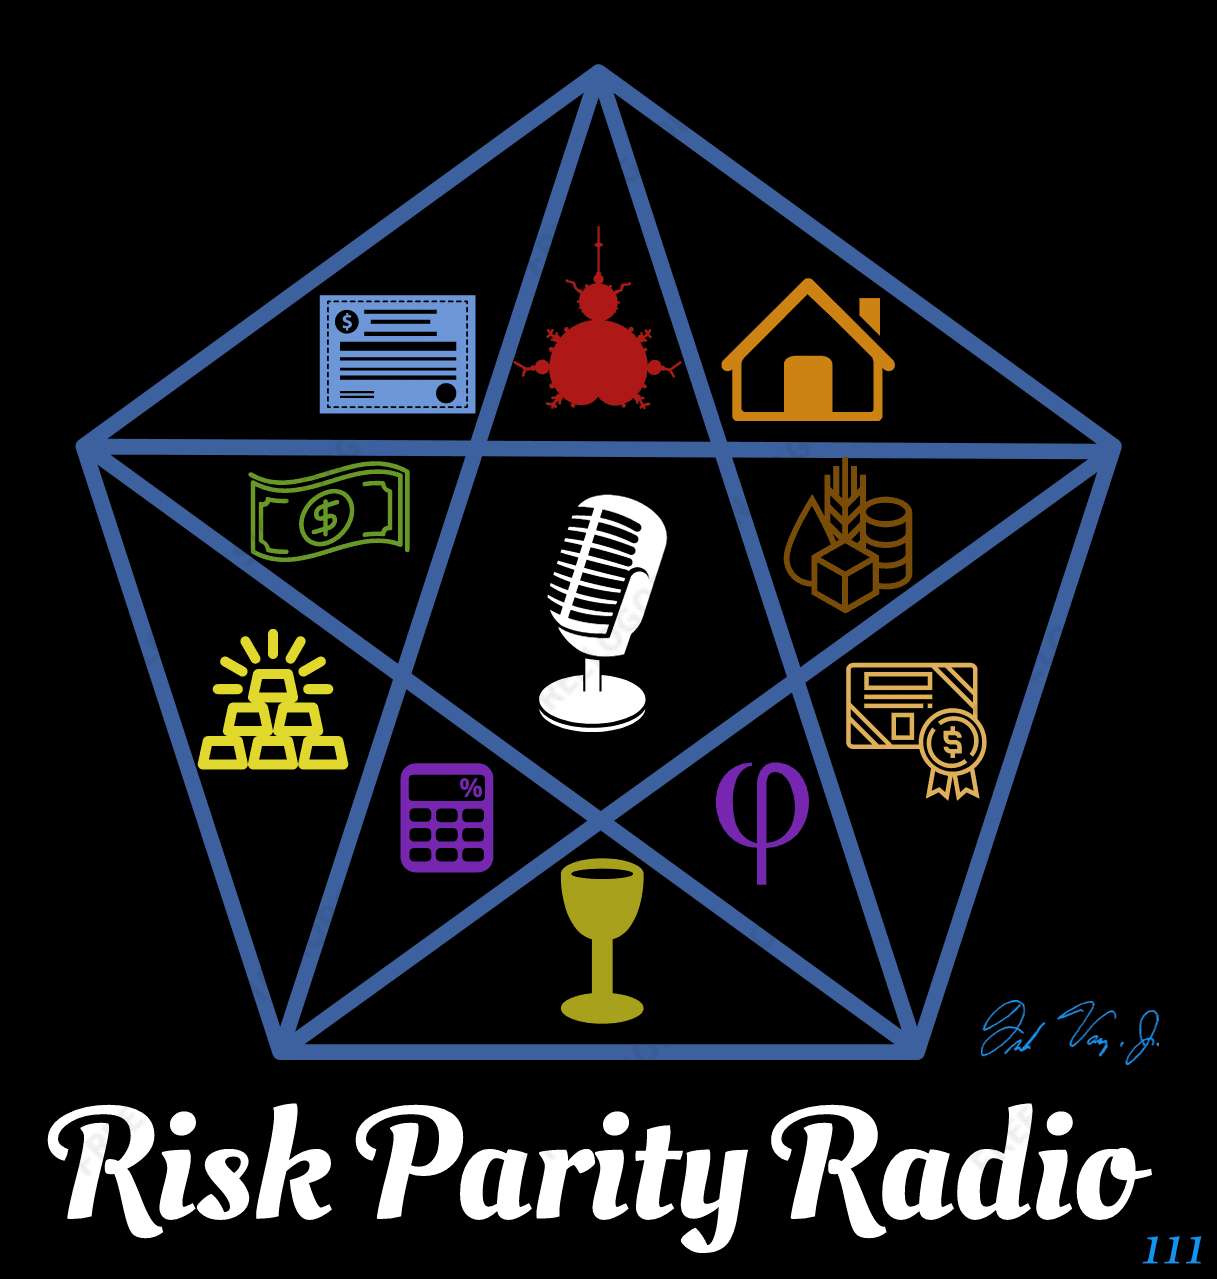 Limited Edition Risk Parity Radio Autographed Print #111